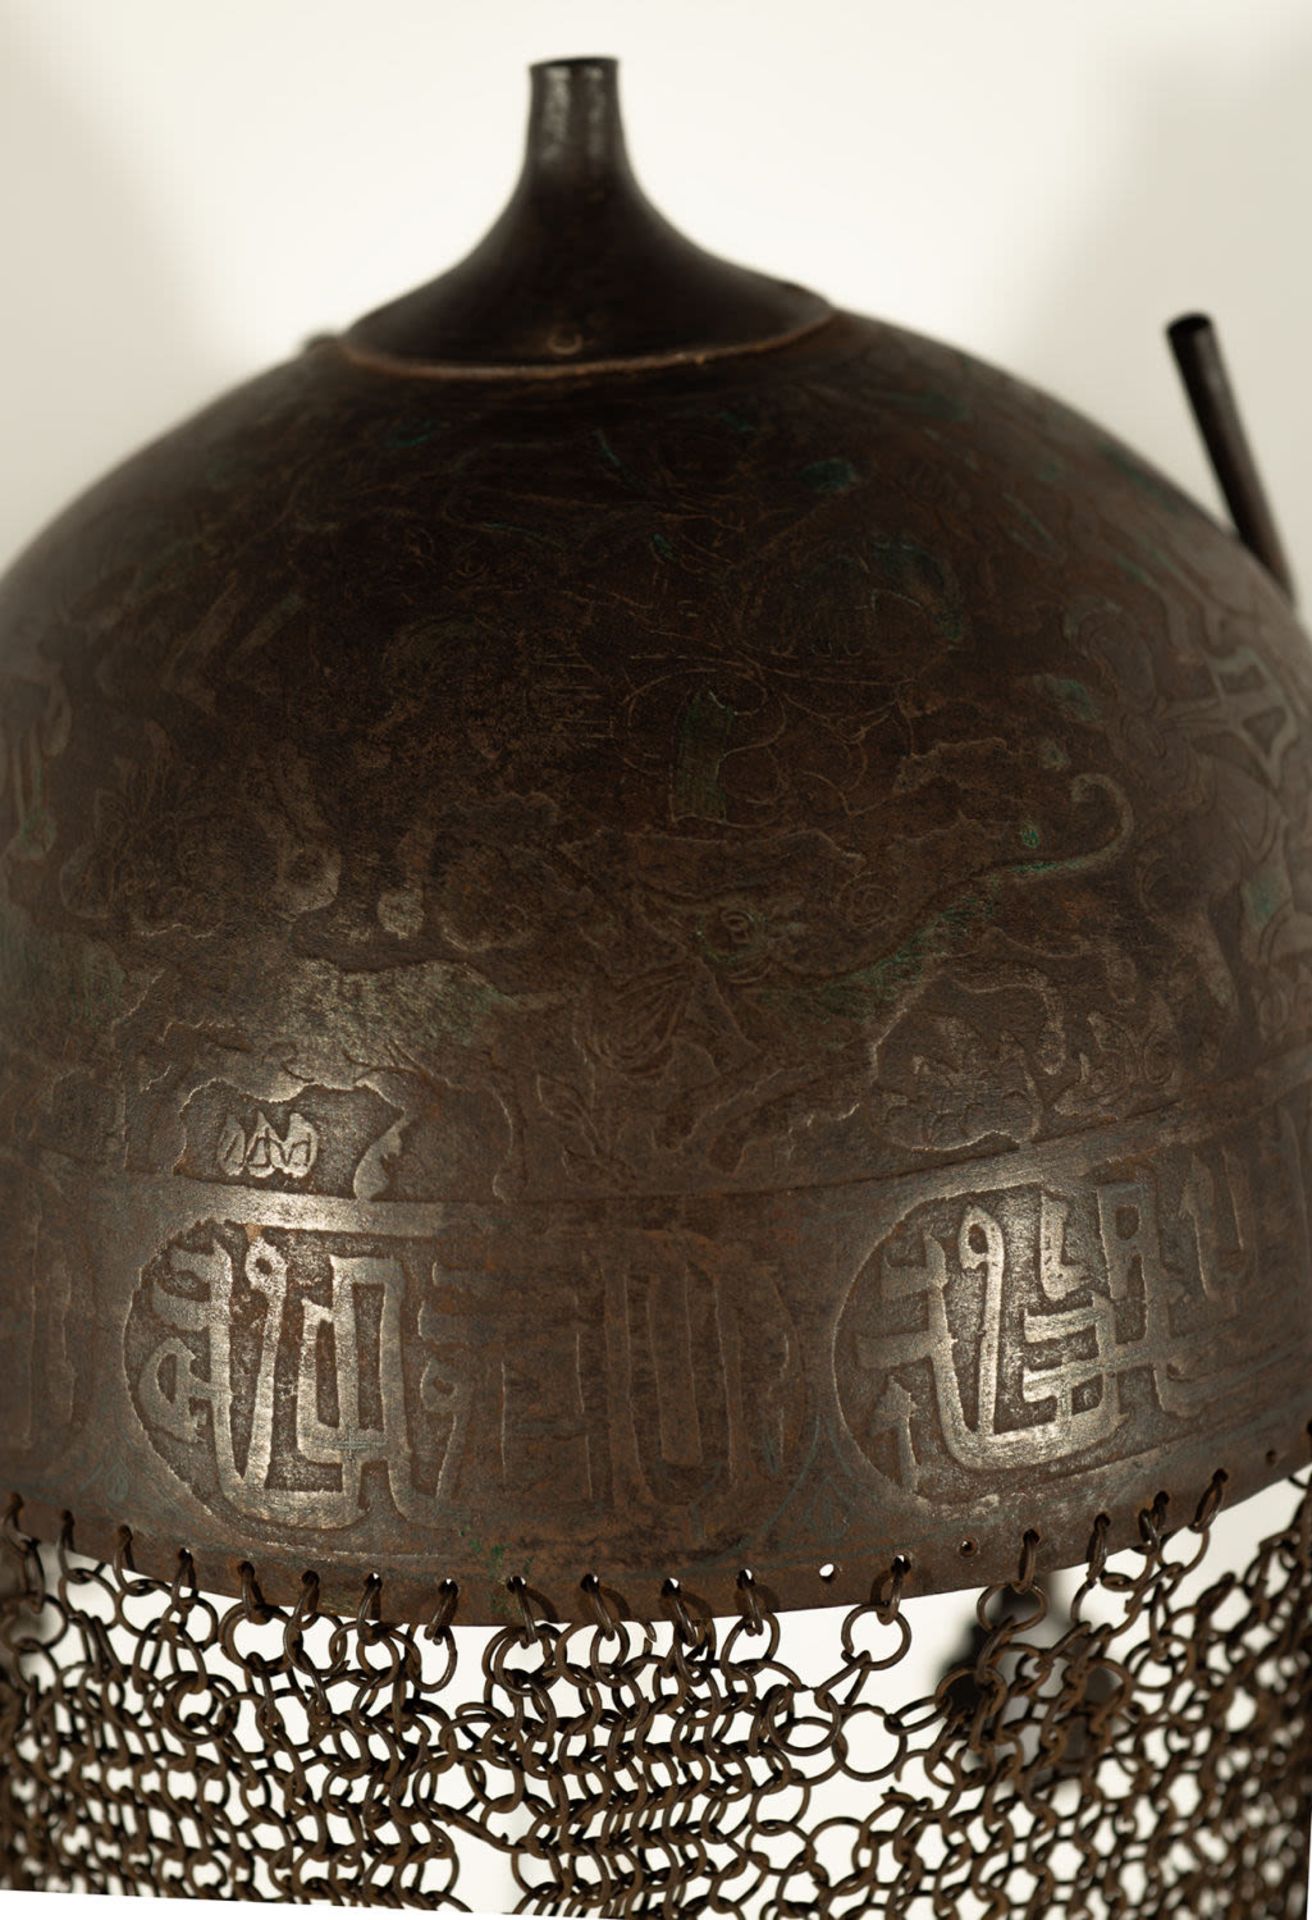 "Kulah Khud" Helmet of a Persian or Mughal Infantry Soldier, Central Asia, 18th - 19th century - Image 4 of 6